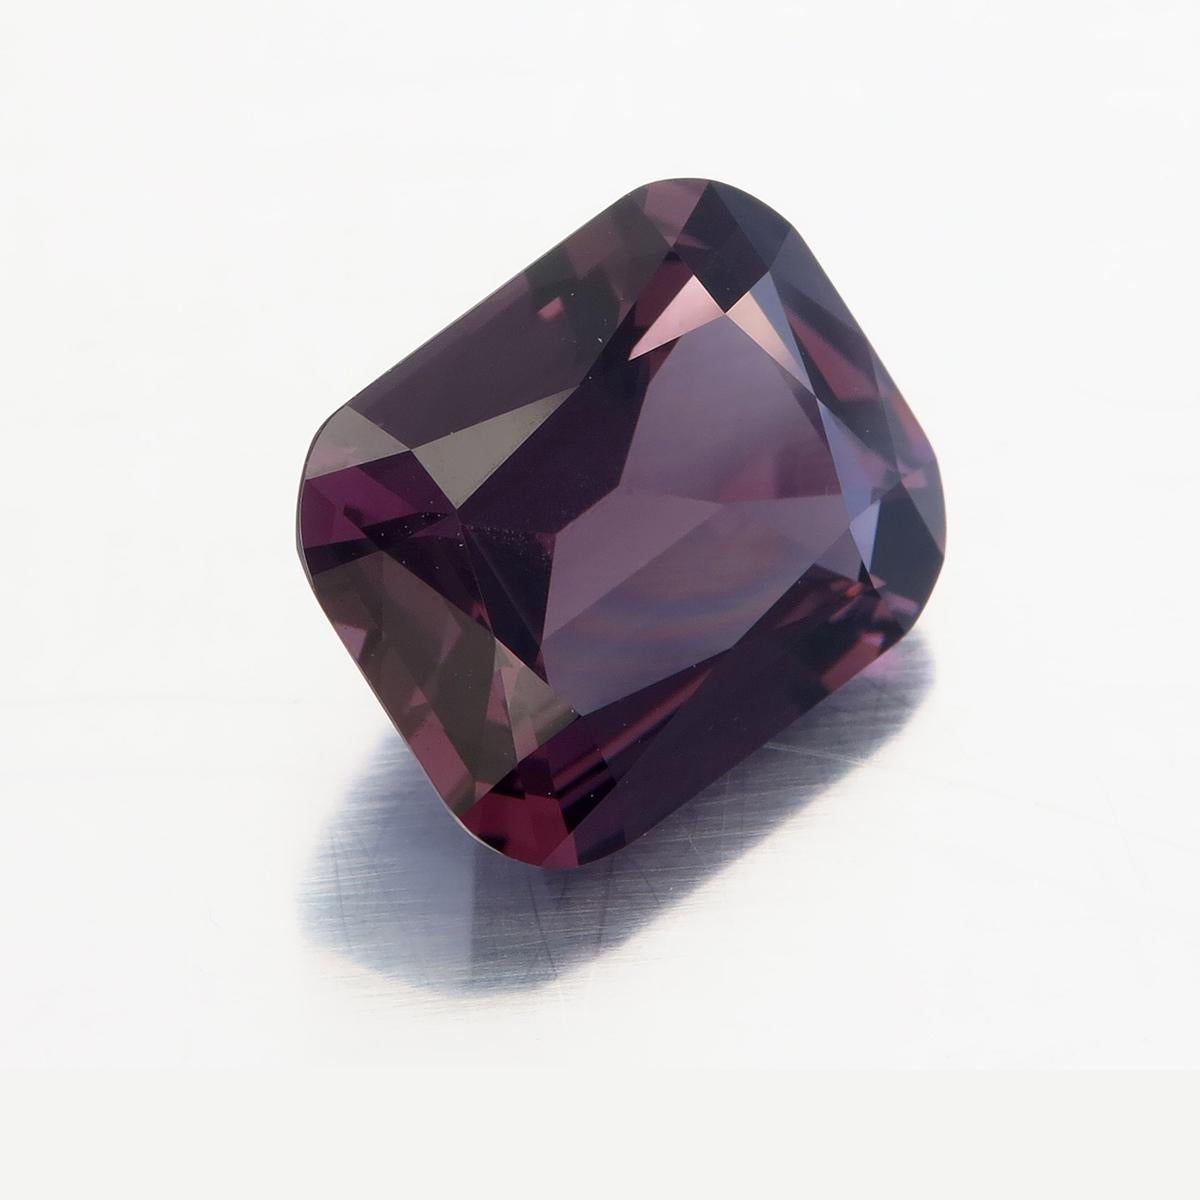 Antique Cushion Cut Lotus Certified 3.56 Carat Purple Spinel from Sri Lanka For Sale